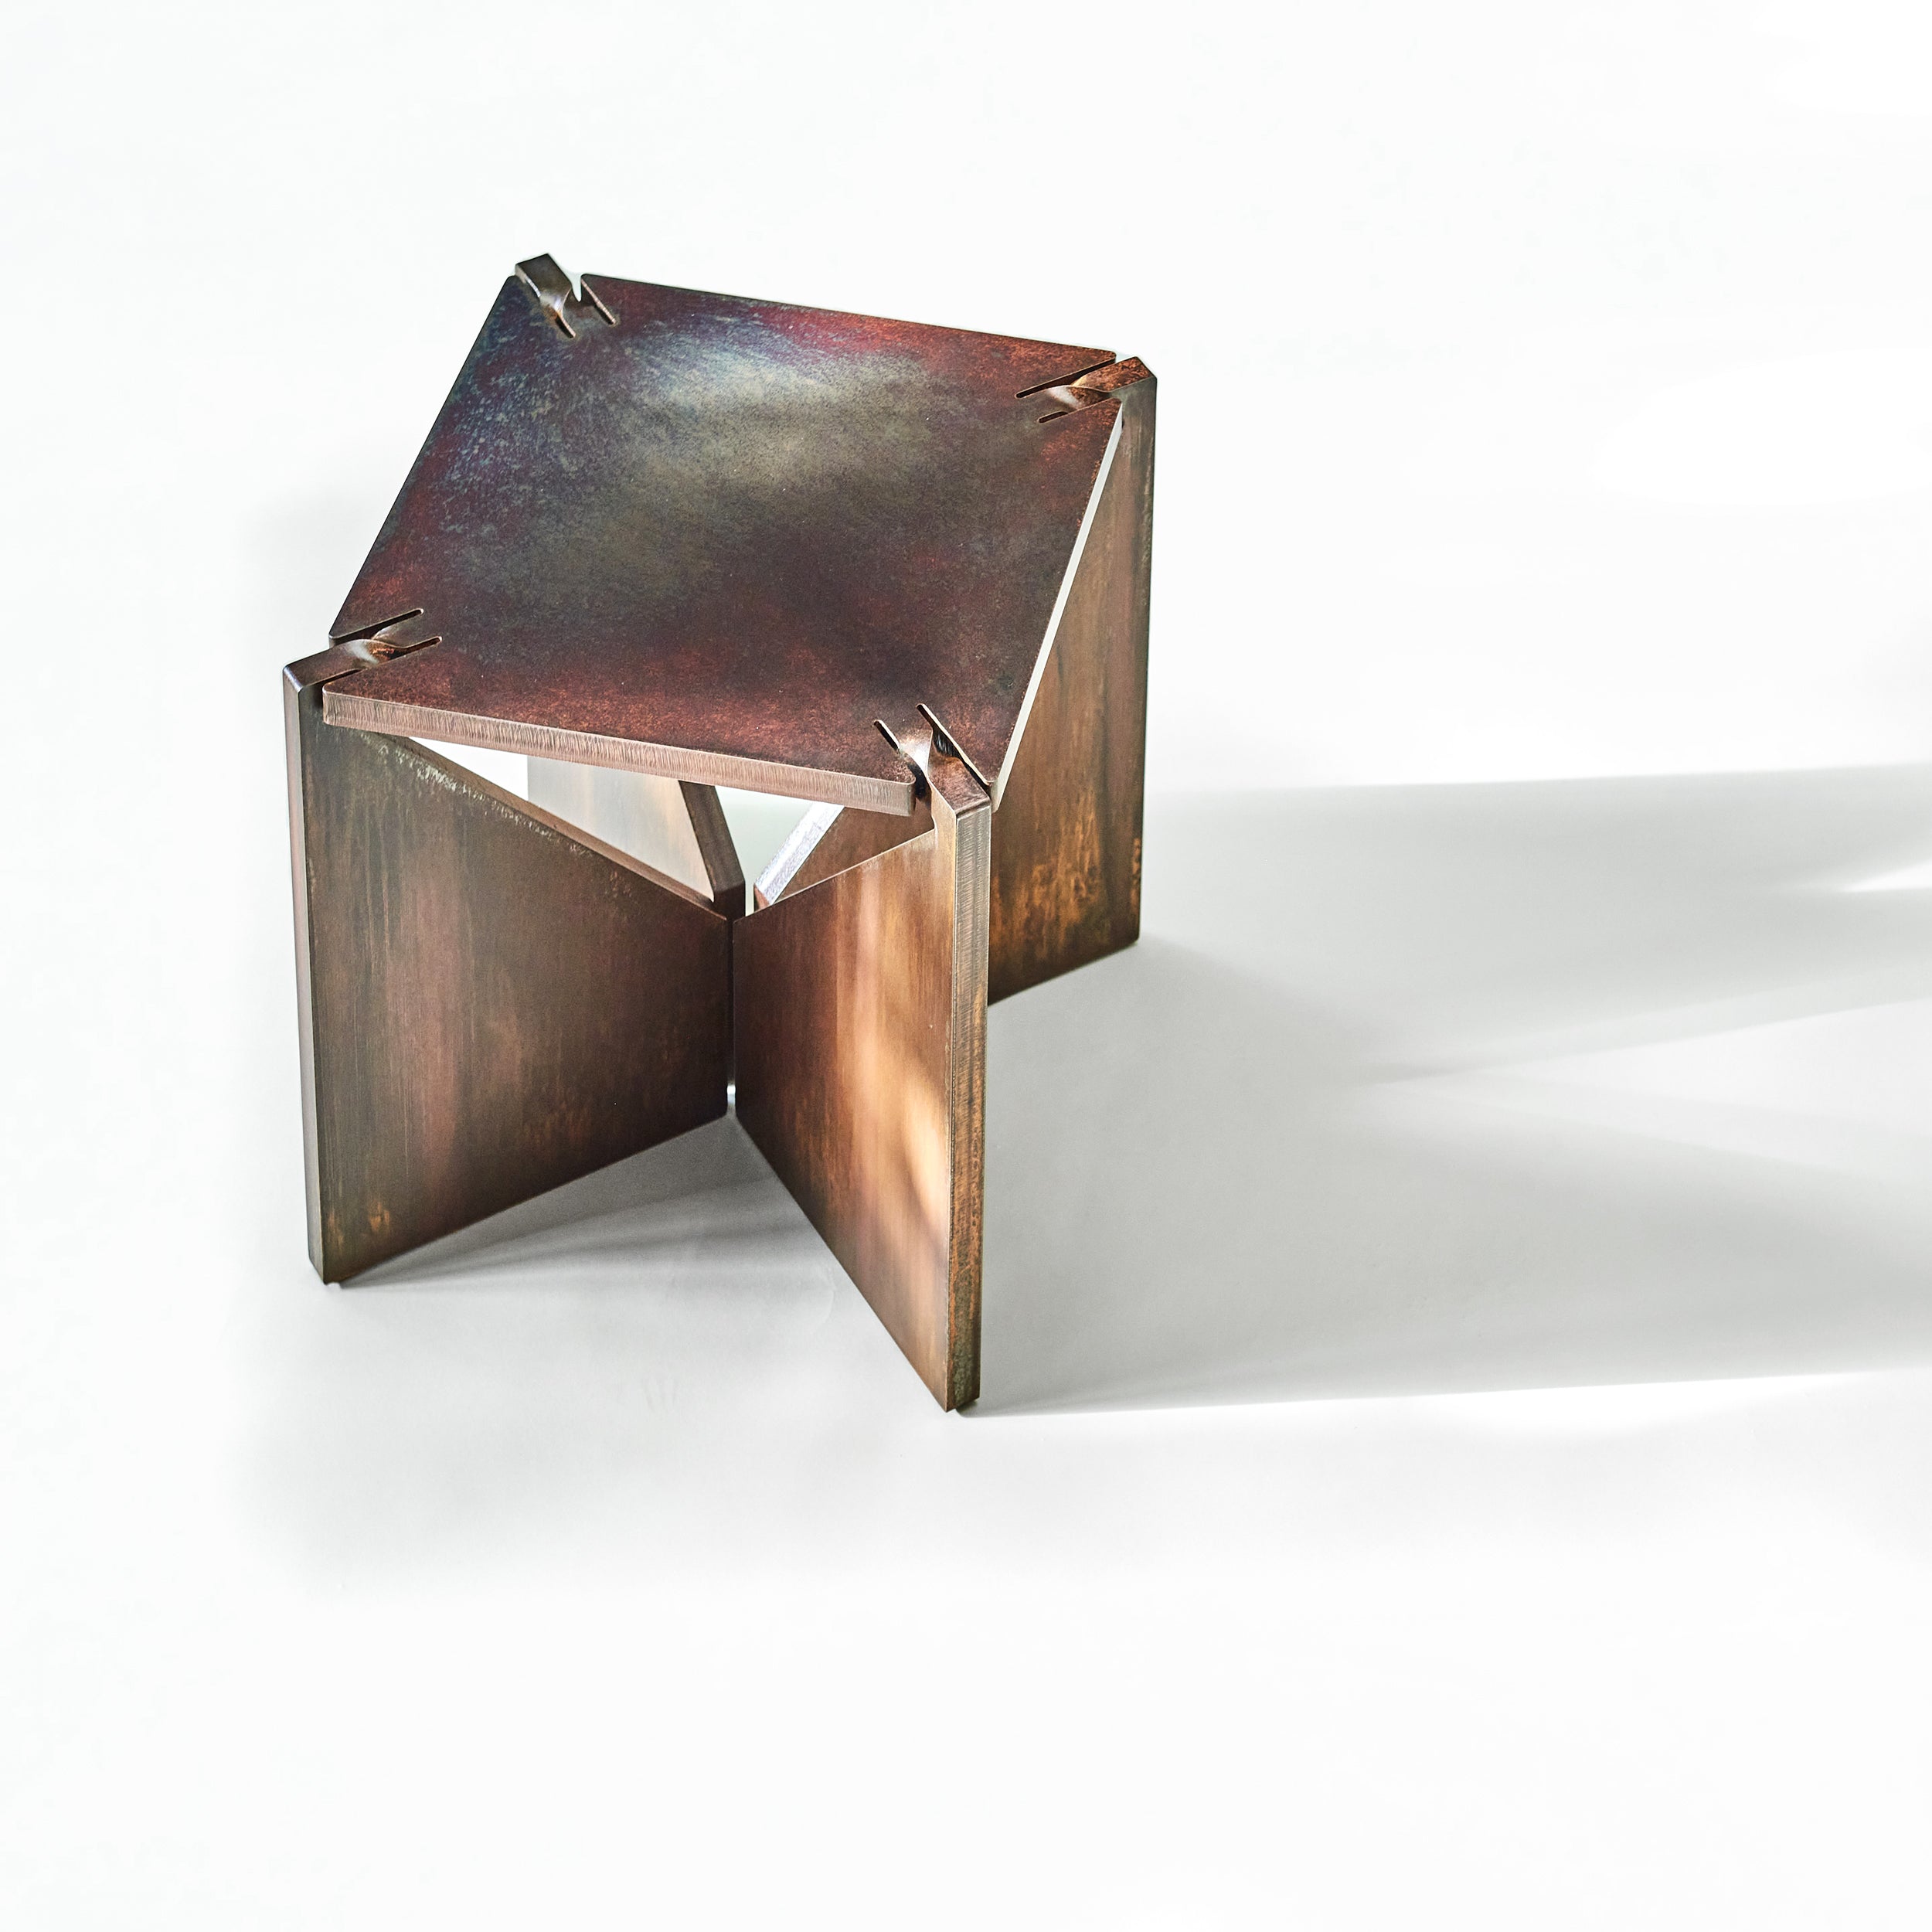 ONE Square Steel Table with Copper Patina by Frank Penders